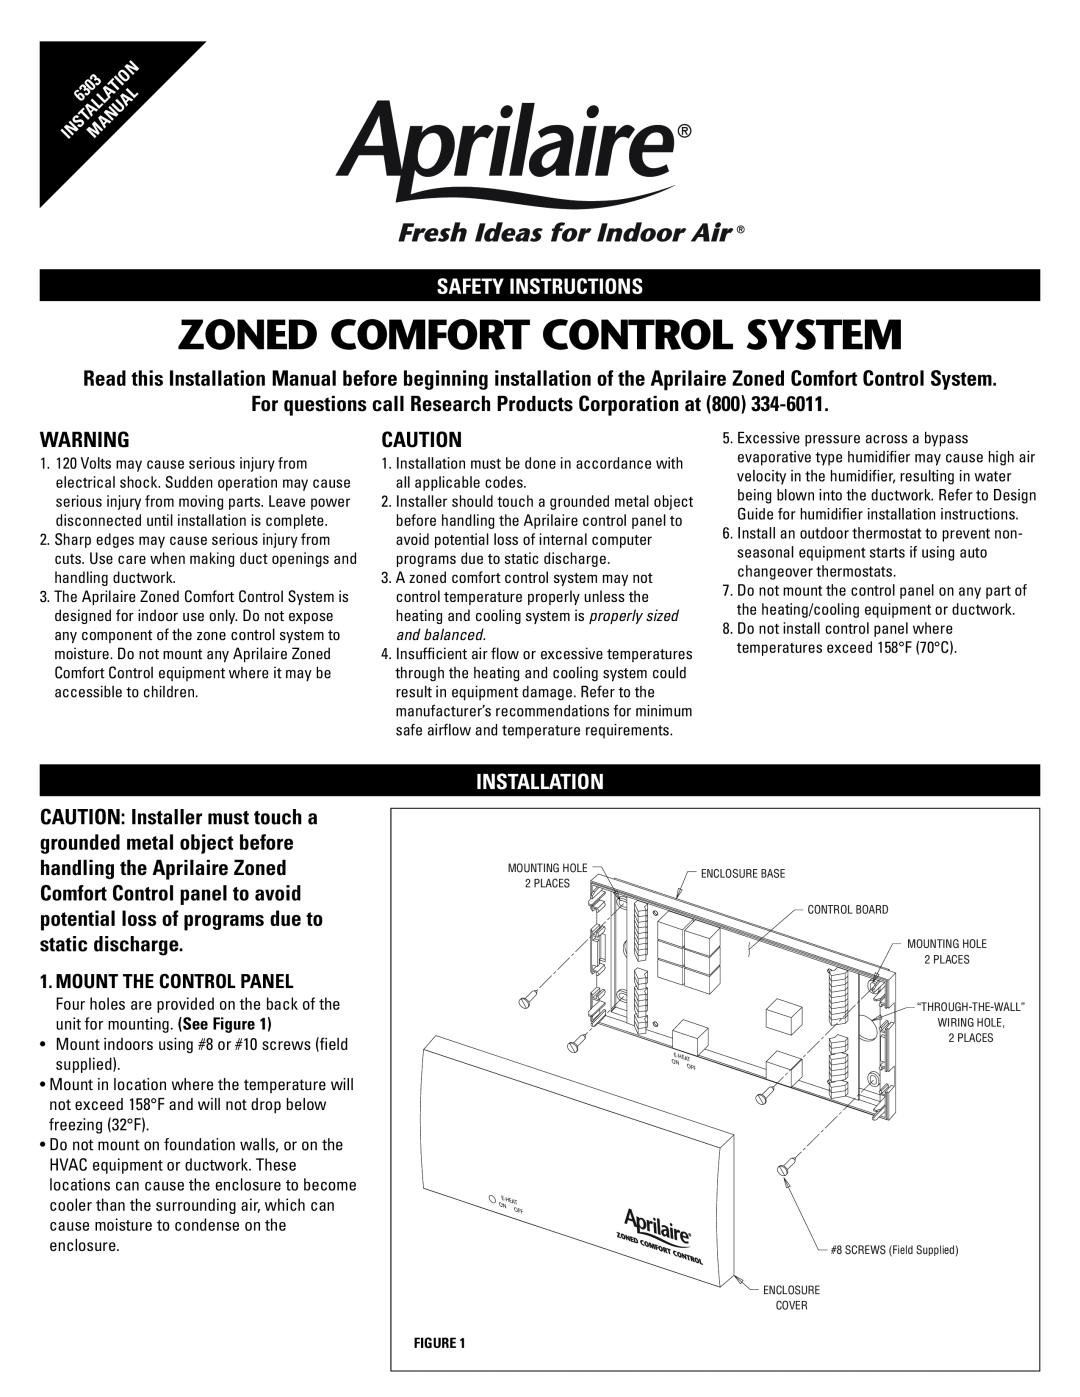 Aprilaire 6303 installation instructions Mount The Control Panel, Zoned Comfort Control System, Safety Instructions 